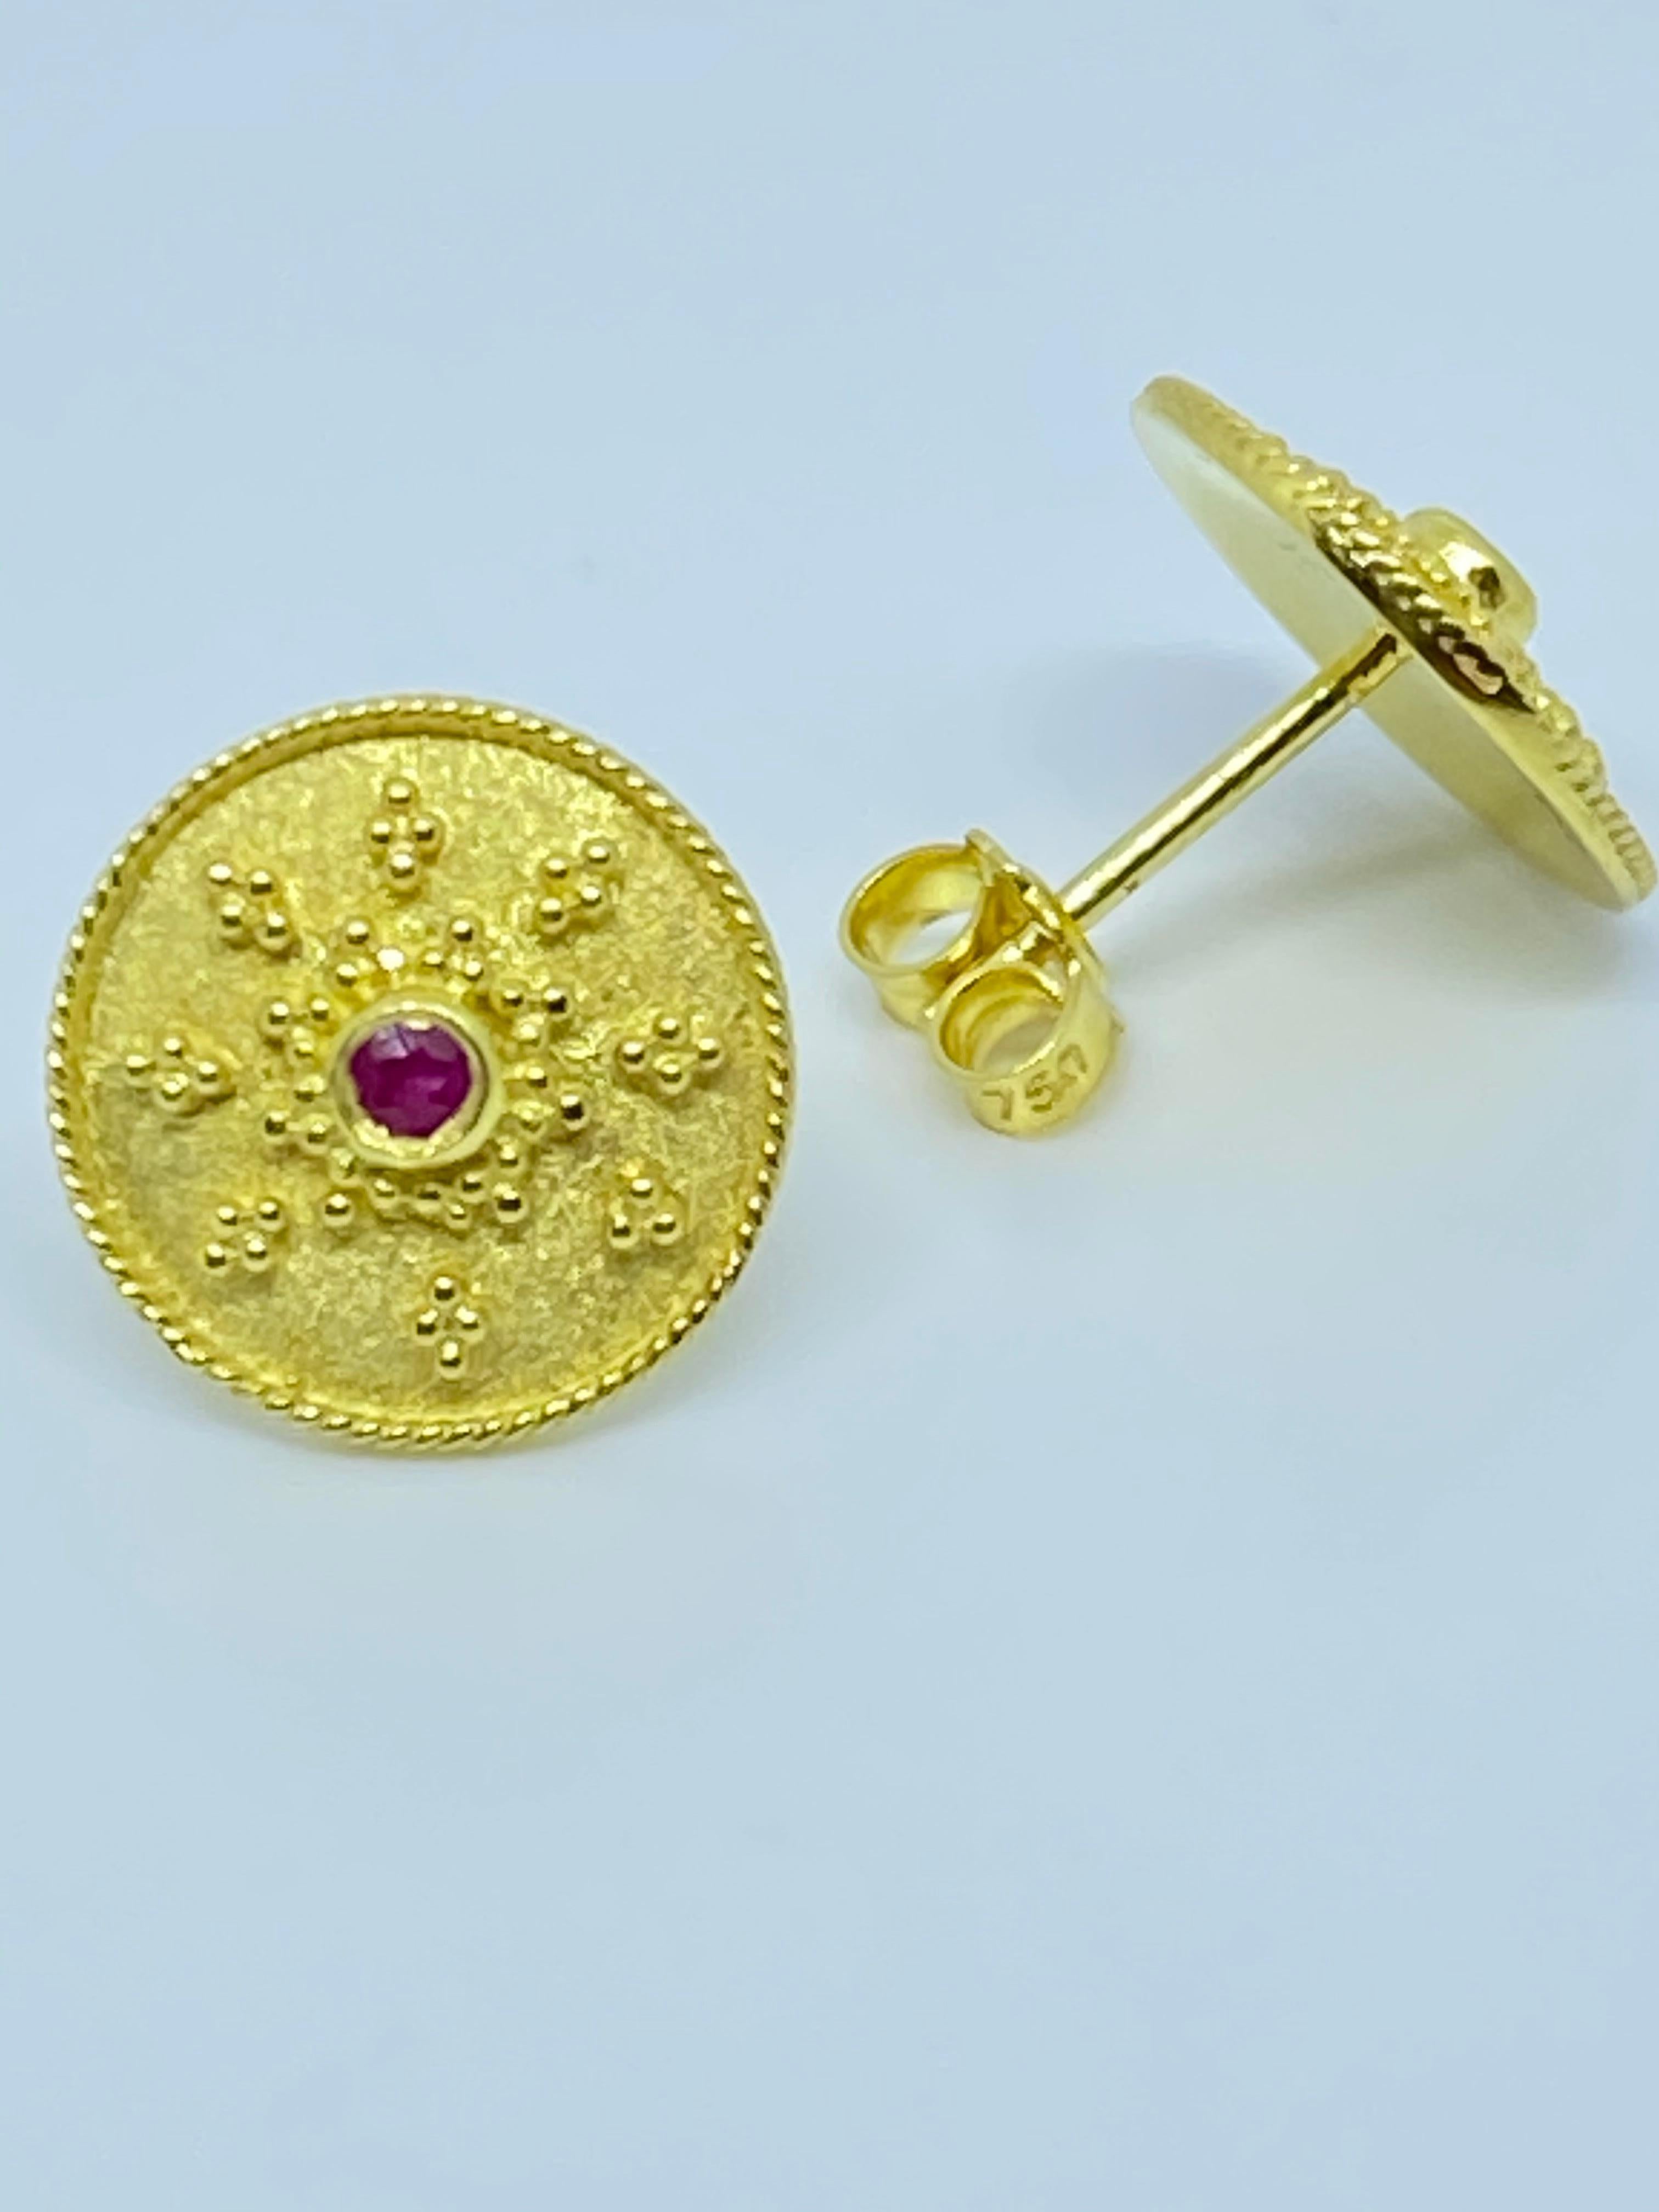 These S.Georgios designer earrings are hand made from 18 Karat Yellow Gold and decorated with Byzantine-era style bead granulation workmanship. These beautiful stud earrings feature 2 Brilliant cut Rubies total weight of 0.05 Carat and are finished